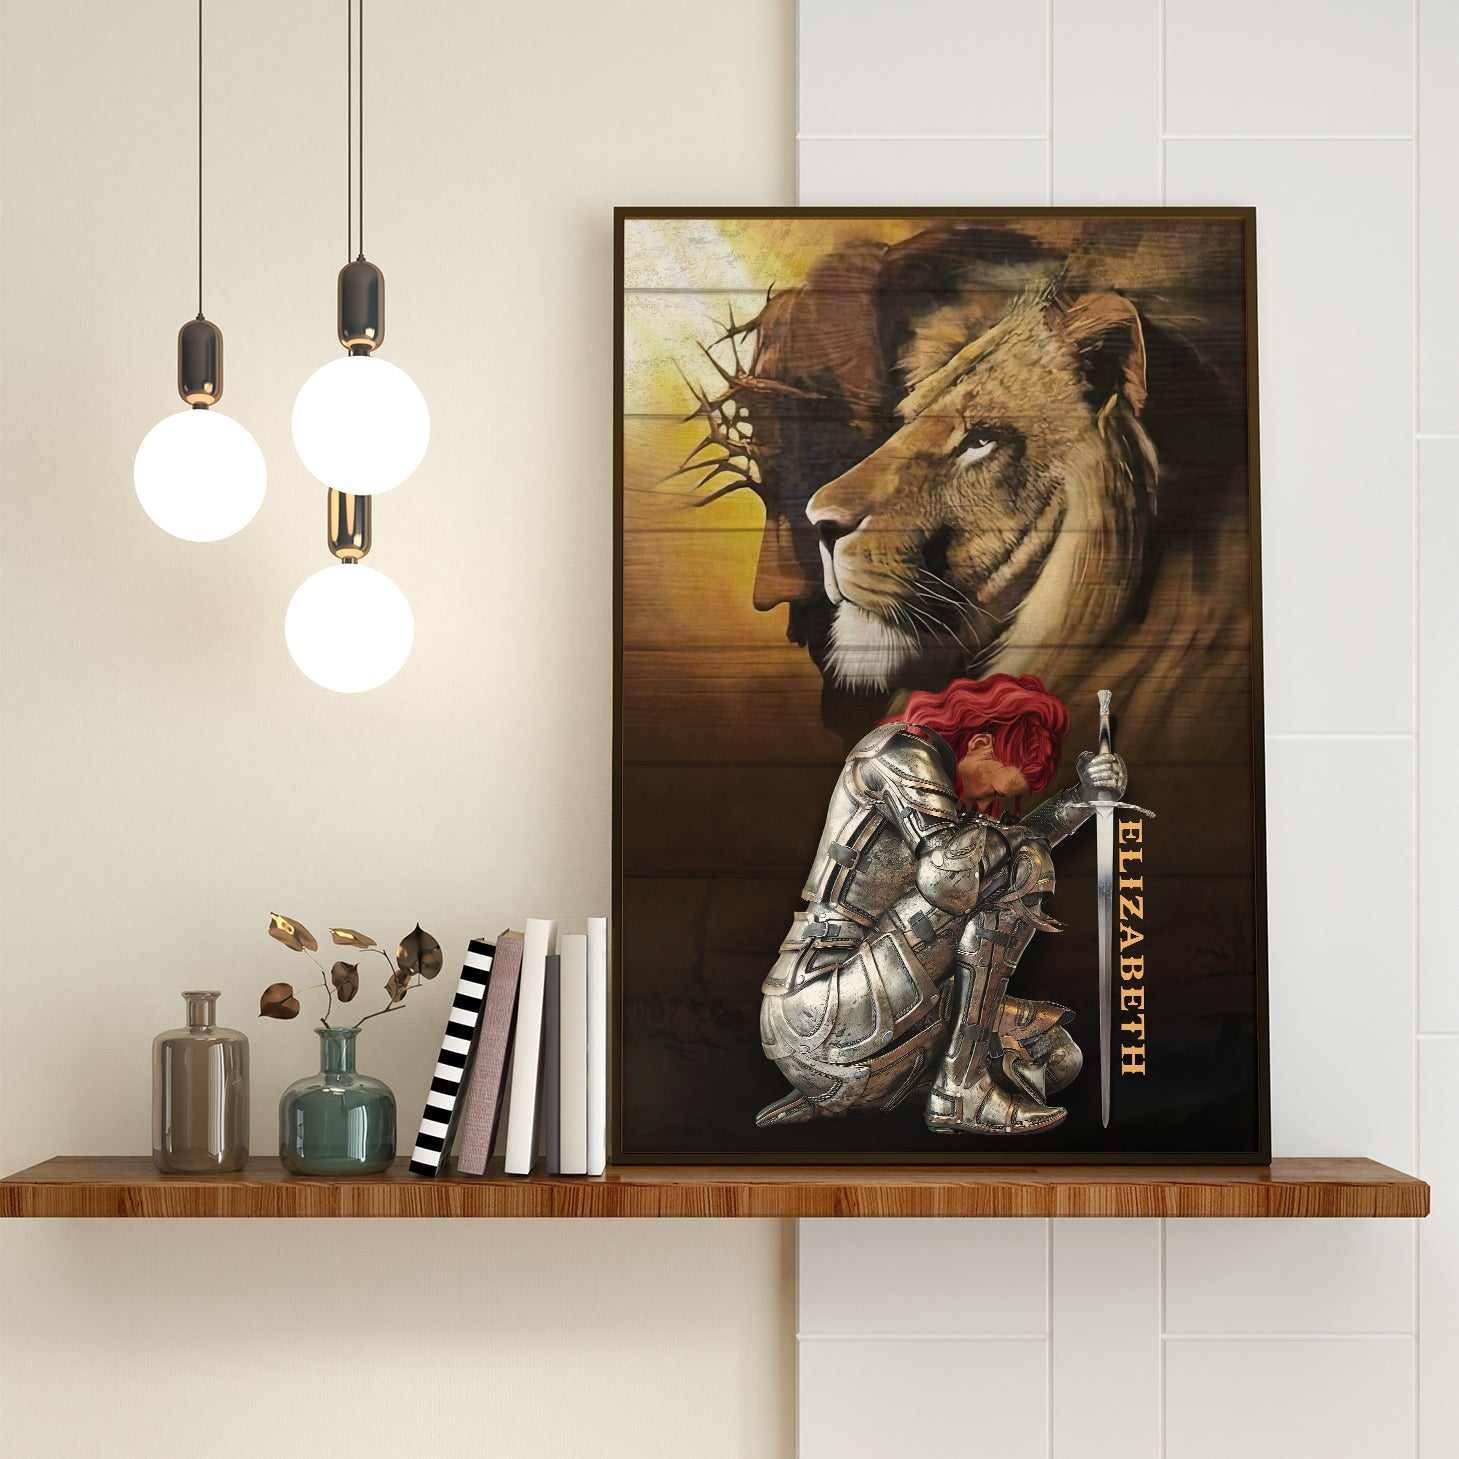 Personalized Woman Warrior of God, Armor Jesus Lion Warrior Woman Poster